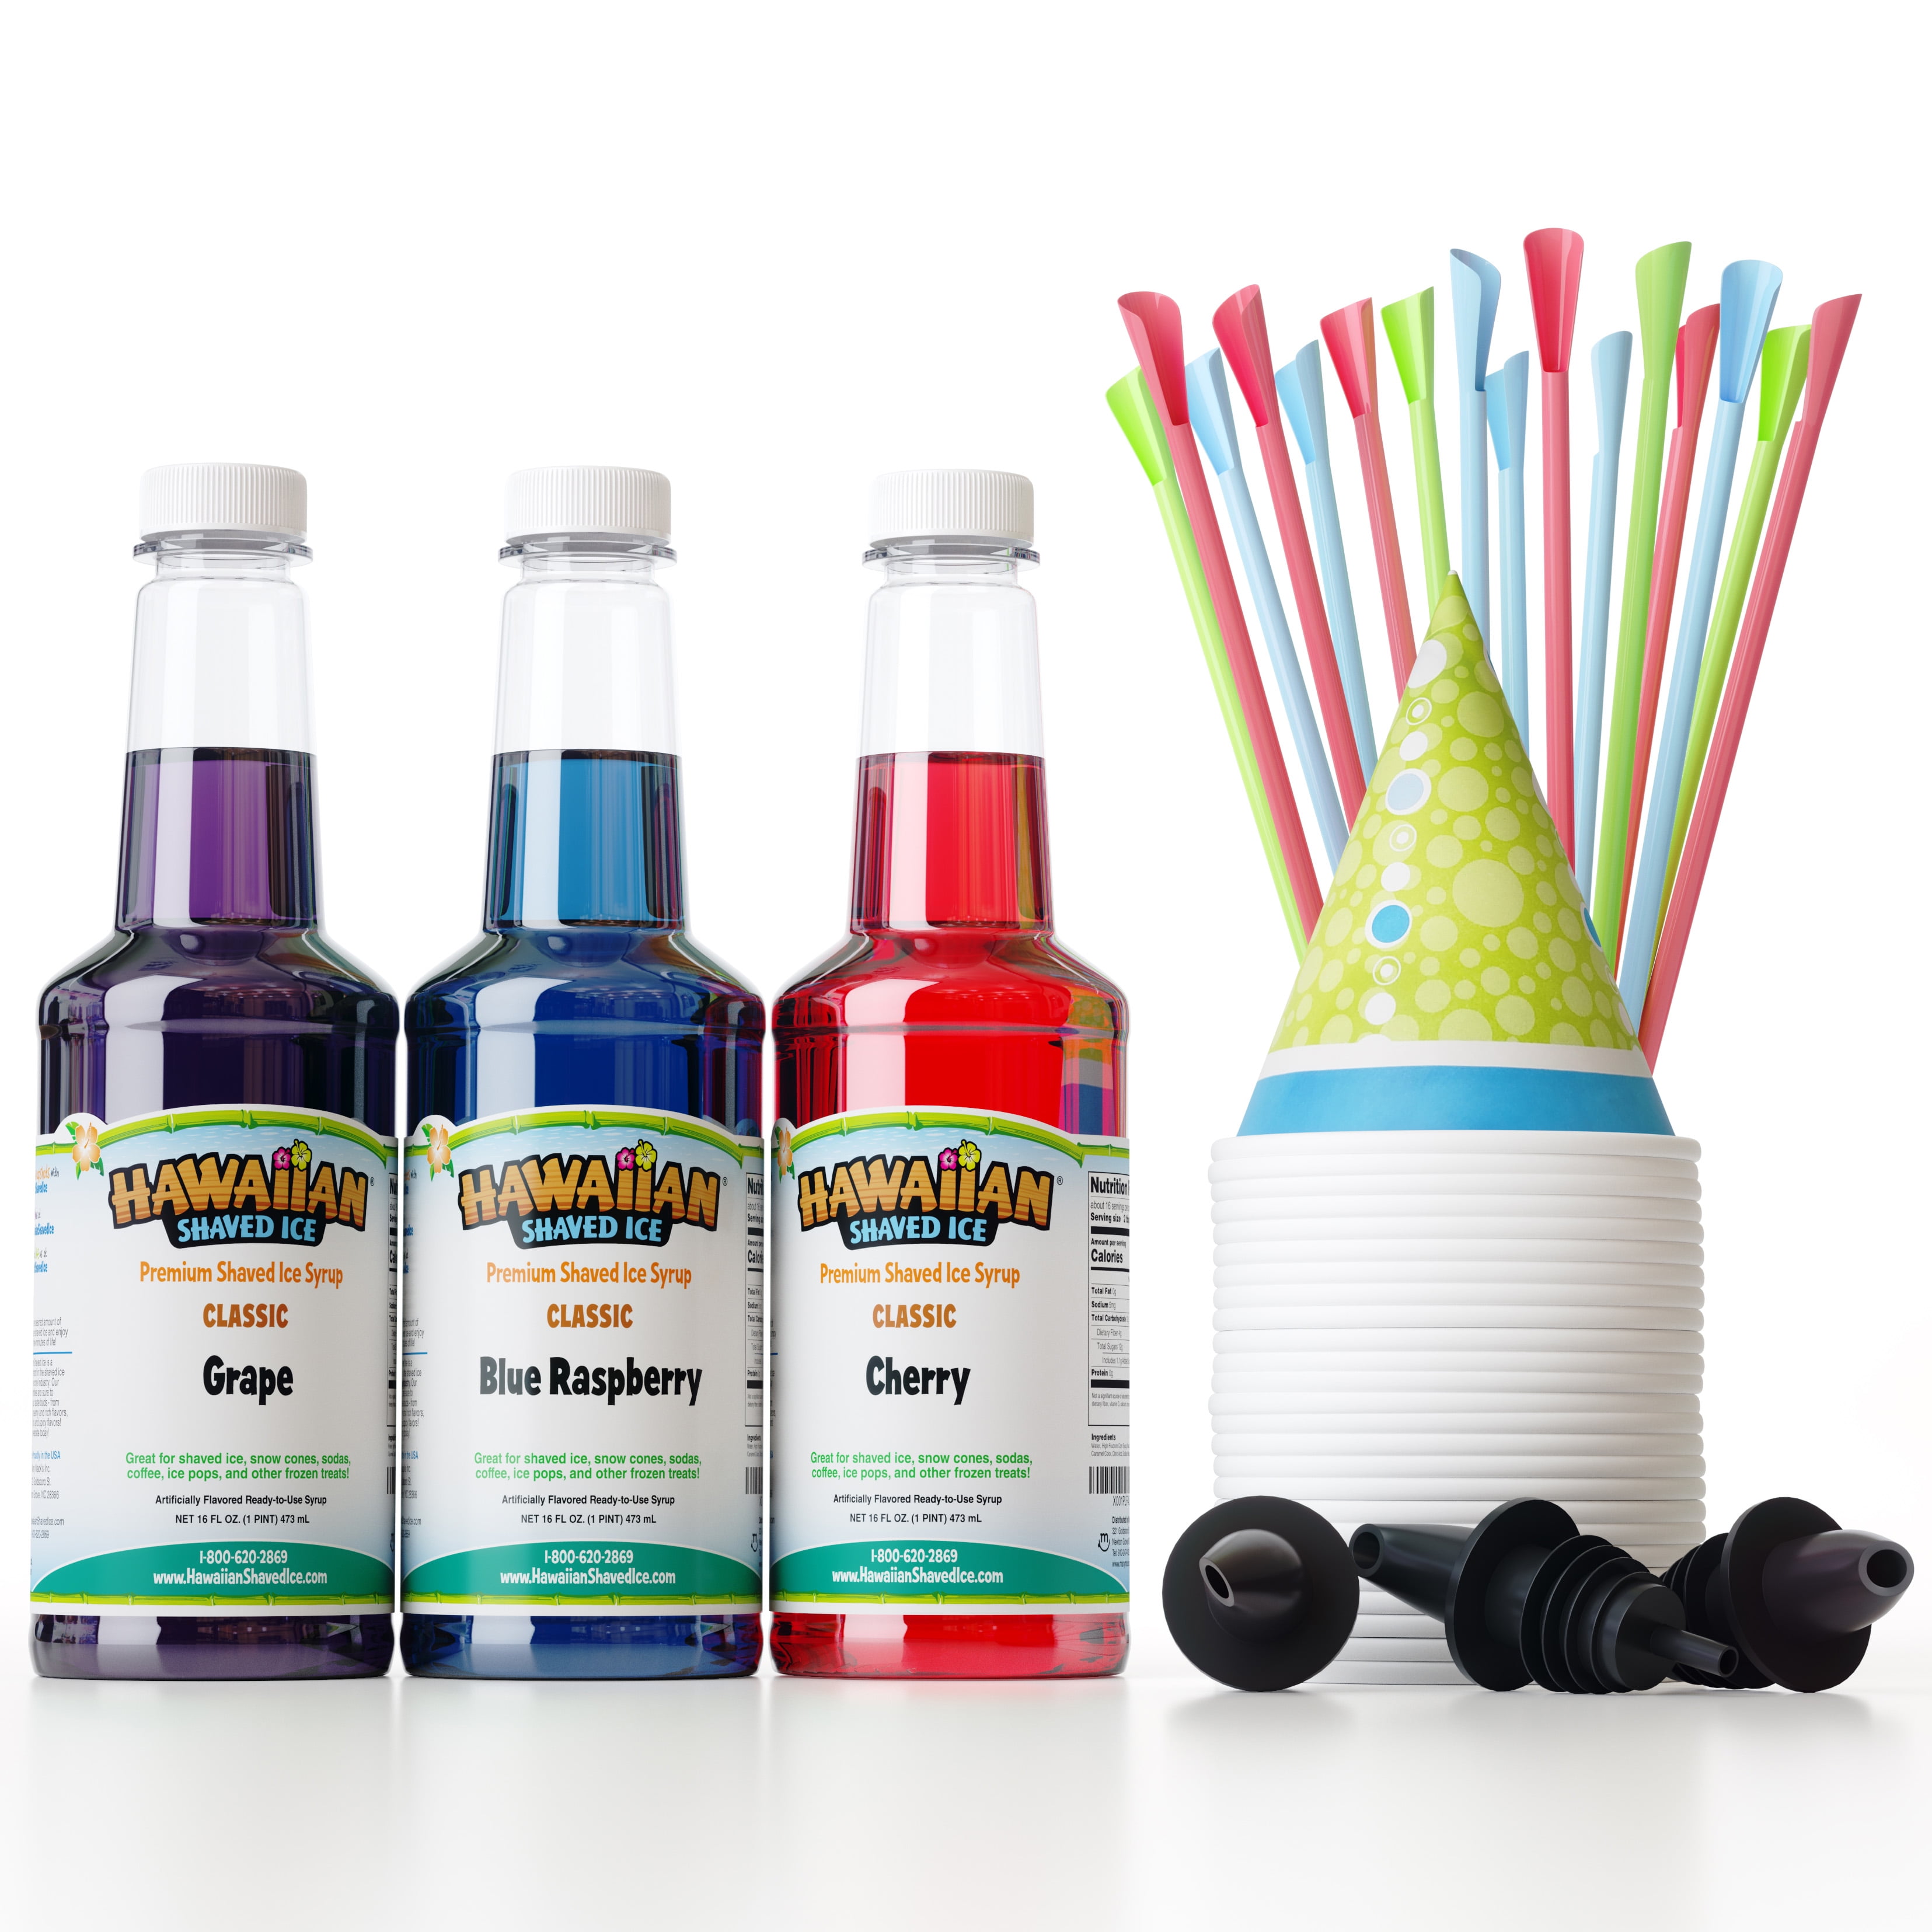 Hawaiian Shaved Ice Flavor Fun Syrup and Accessories Pack